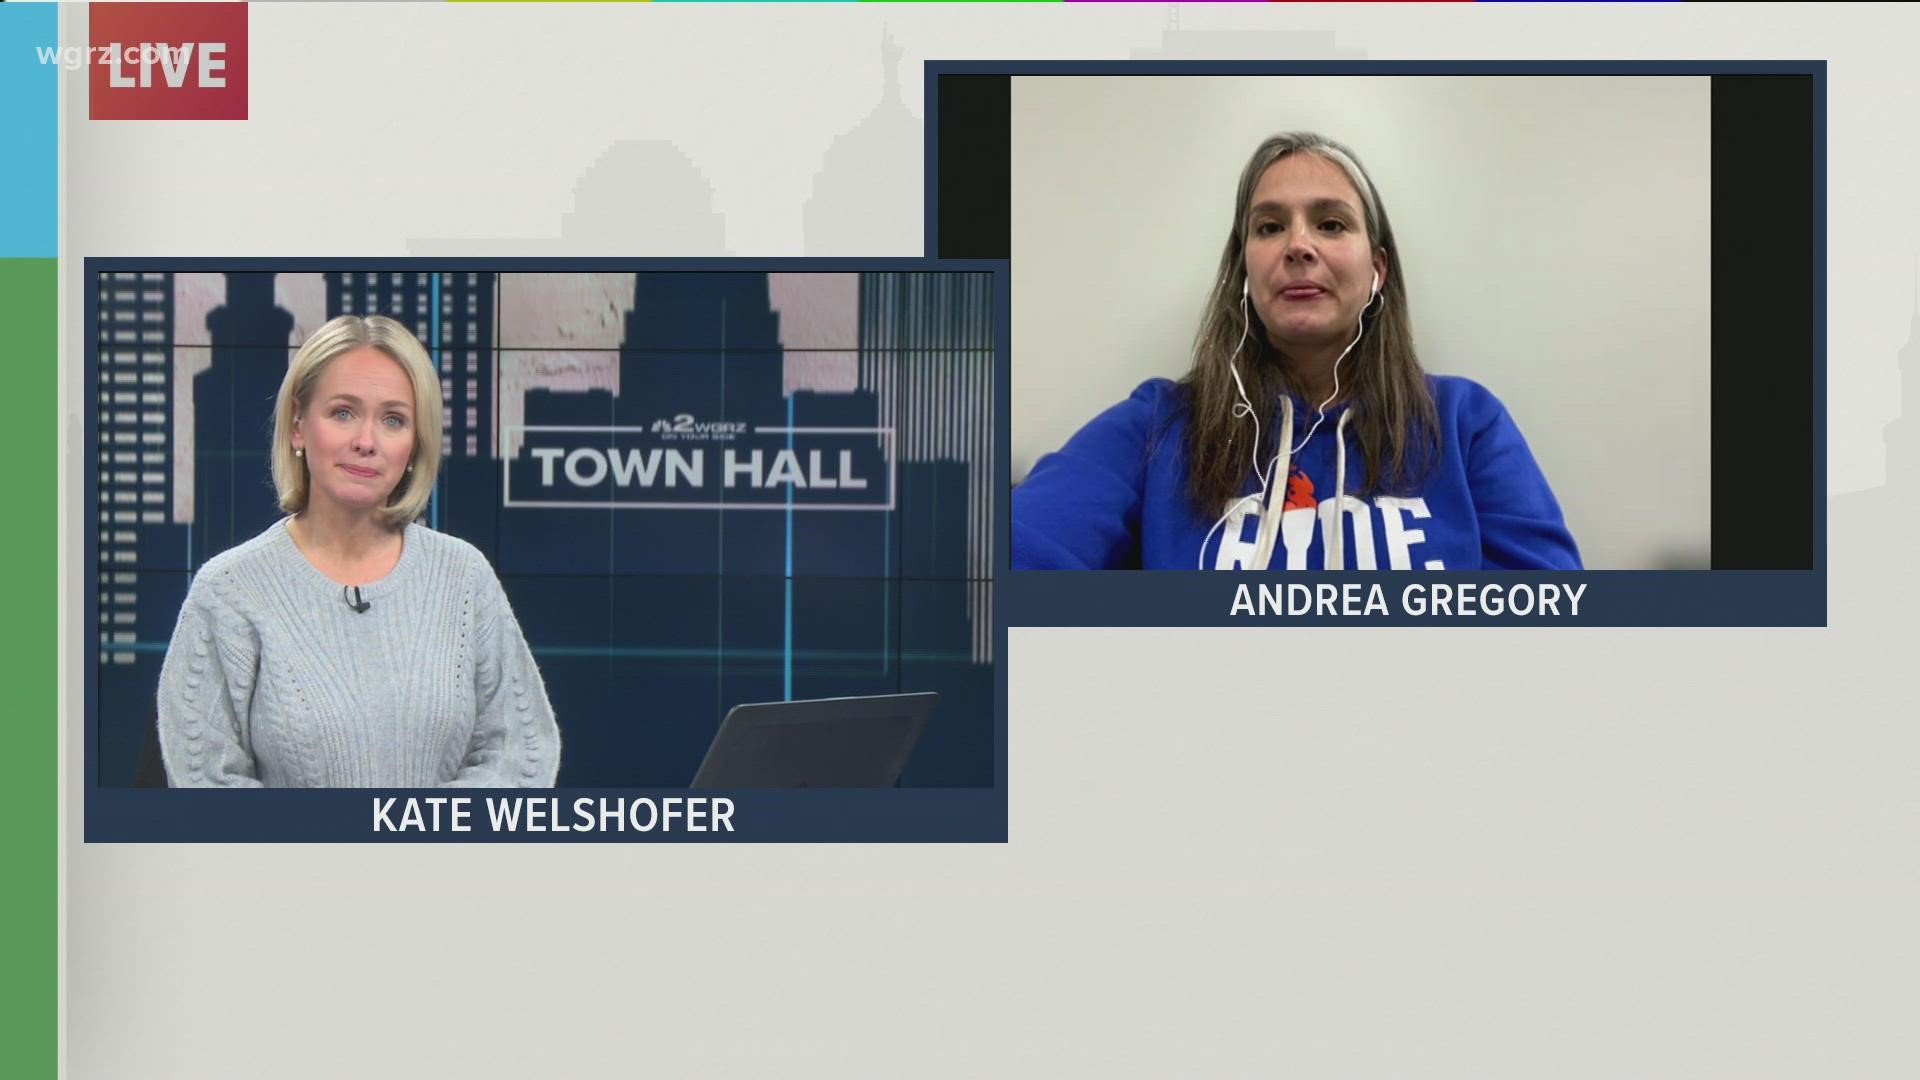 Andrea Gregory, director of special events for the Roswell Park Alliance Foundation, joined our Town Hall to discuss this year's Ride For Roswell plans.